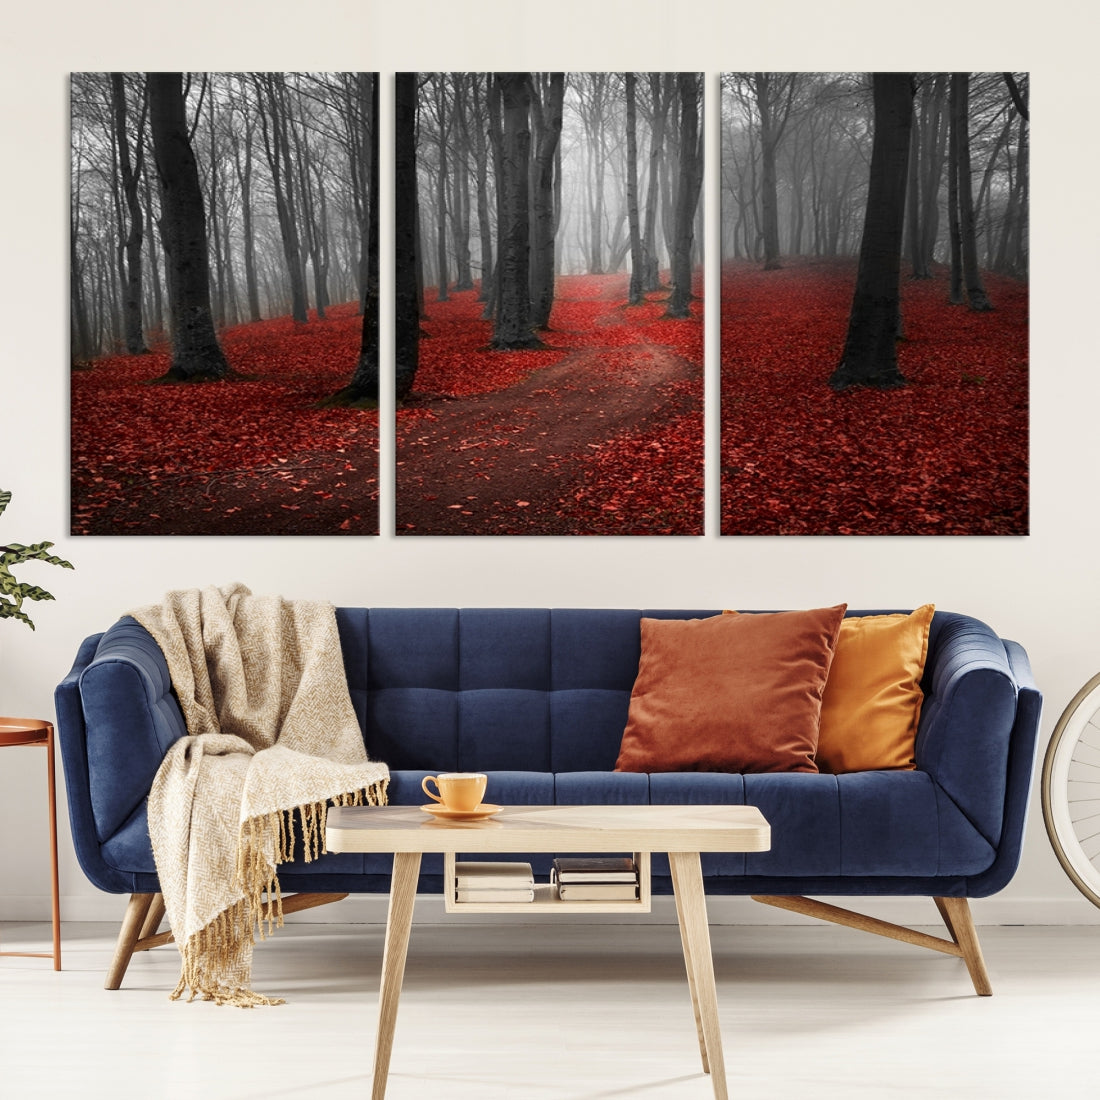 Wonderful Forest with Red Leaves on Ground Large Wall Art Landscape Canvas Print